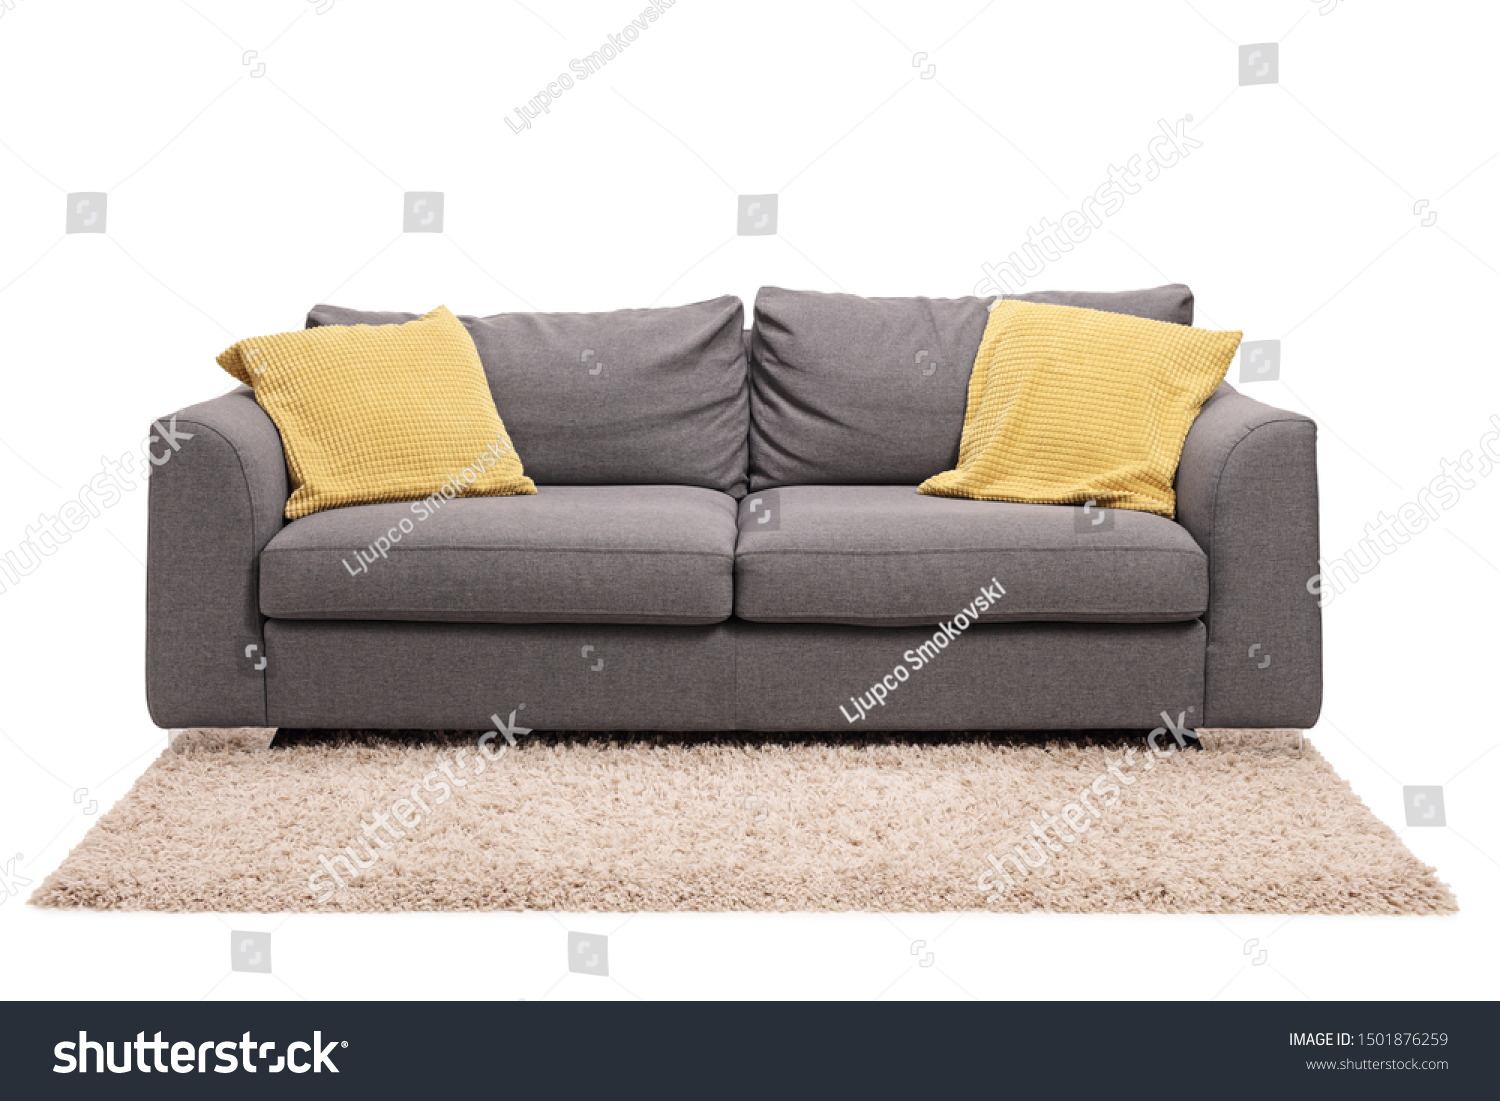 Studio shot of a grey sofa with green pillows on a carpet isolated on white background #1501876259